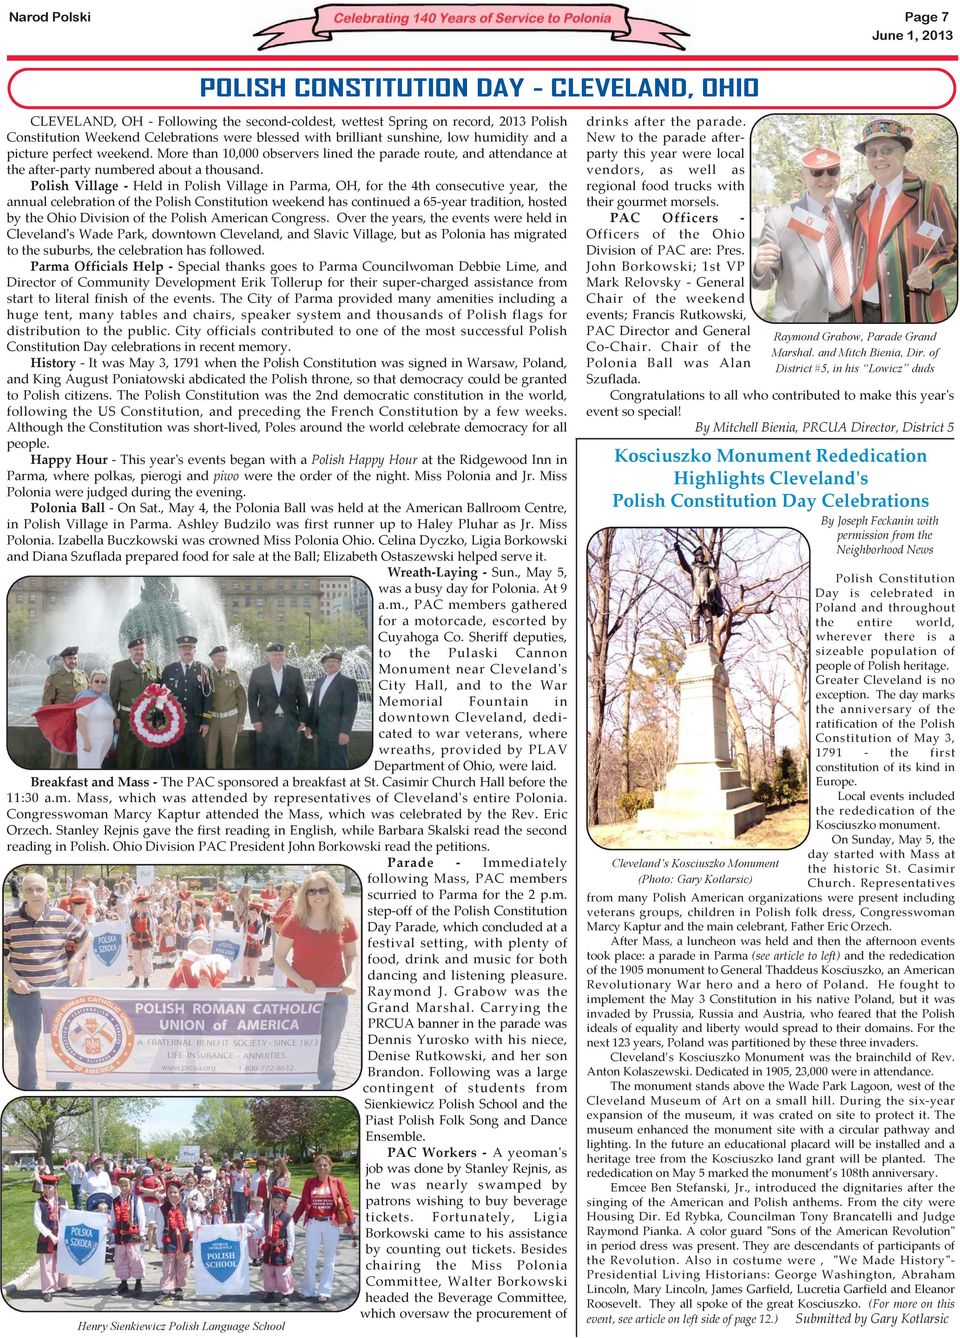 Polish Village - Held in Polish Village in Parma, OH, for the 4th consecutive year, the annual celebration of the Polish Constitution weekend has continued a 65-year tradition, hosted by the Ohio